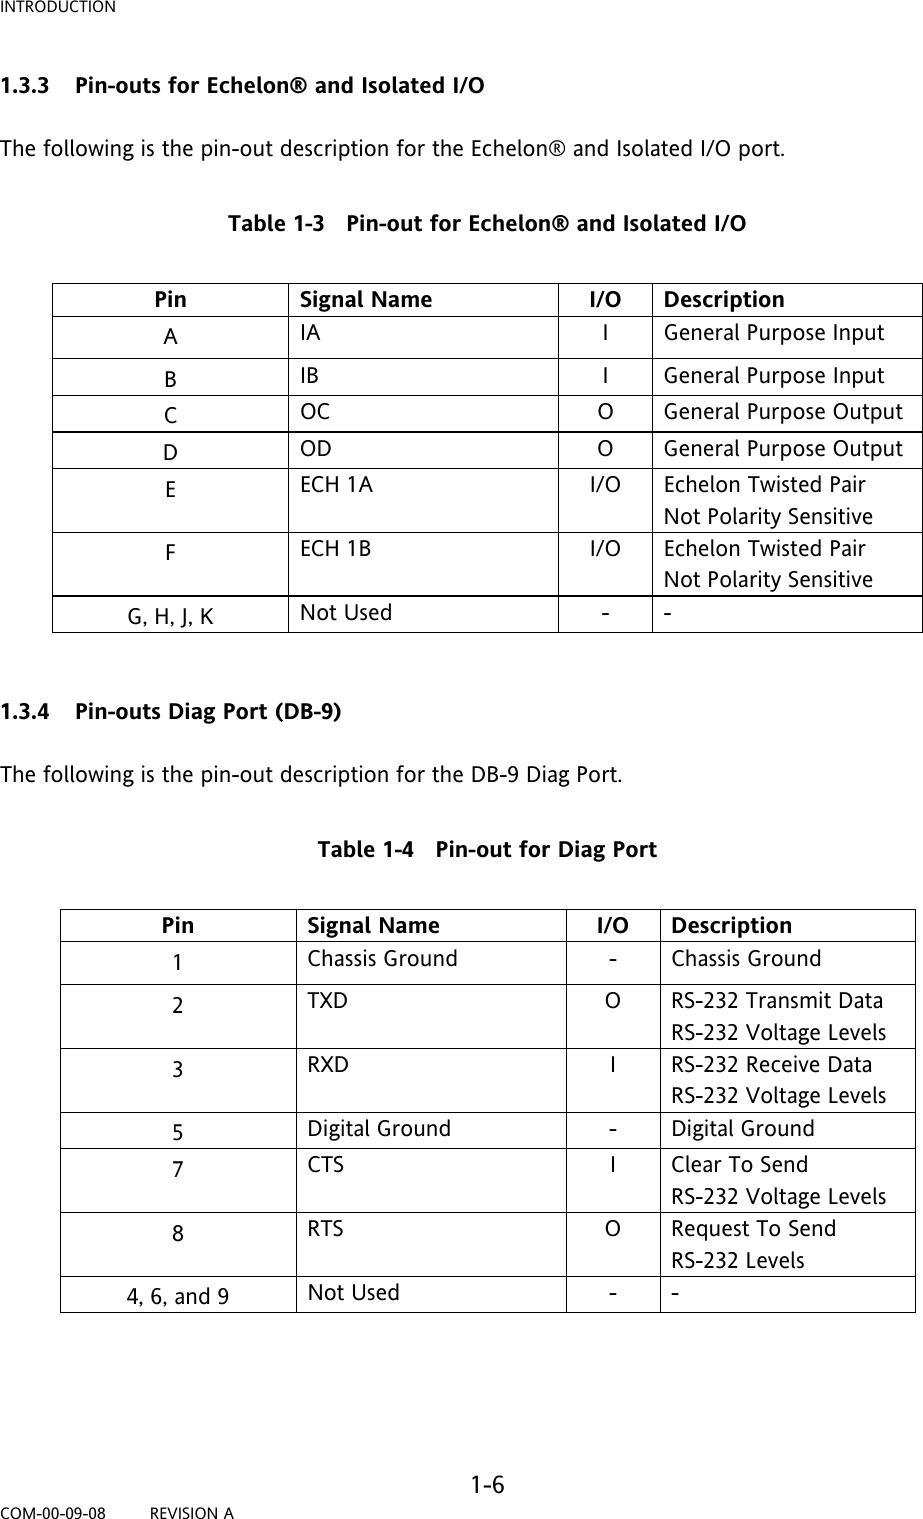 INTRODUCTION  1-6 COM-00-09-08         REVISION A 1.3.3 Pin-outs for Echelon® and Isolated I/O  The following is the pin-out description for the Echelon® and Isolated I/O port.  Table 1-3   Pin-out for Echelon® and Isolated I/O  Pin Signal Name  I/O Description A  IA I General Purpose Input B  IB I General Purpose Input C  OC O General Purpose Output D  OD O General Purpose Output E  ECH 1A  I/O  Echelon Twisted Pair Not Polarity Sensitive F  ECH 1B  I/O  Echelon Twisted Pair Not Polarity Sensitive G, H, J, K  Not Used  -  -   1.3.4 Pin-outs Diag Port (DB-9)  The following is the pin-out description for the DB-9 Diag Port.  Table 1-4   Pin-out for Diag Port  Pin Signal Name  I/O Description 1  Chassis Ground  -  Chassis Ground 2  TXD O RS-232 Transmit Data RS-232 Voltage Levels 3  RXD I RS-232 Receive Data RS-232 Voltage Levels 5  Digital Ground  -  Digital Ground 7  CTS I Clear To Send RS-232 Voltage Levels 8  RTS  O  Request To Send RS-232 Levels 4, 6, and 9   Not Used  -  -    